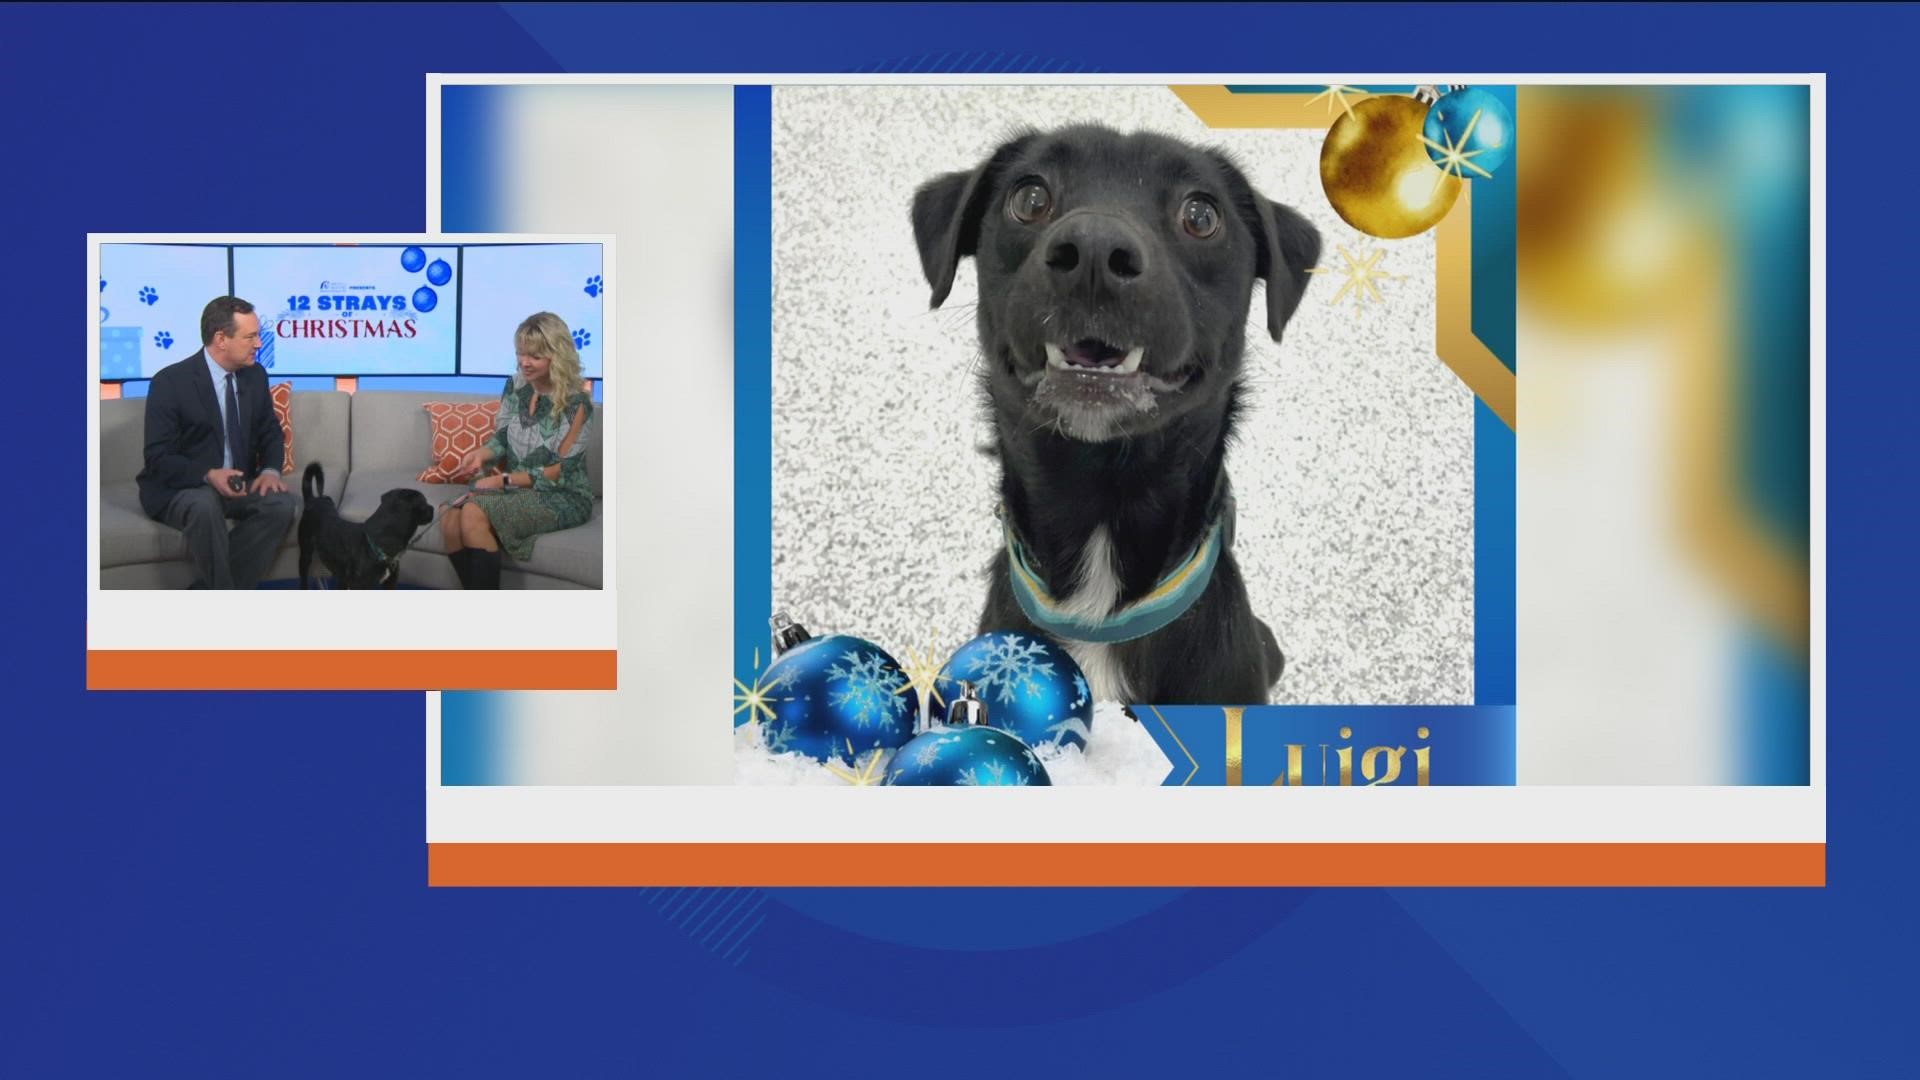 Looking for a furry friend for the holidays? Luigi and other cats and dogs featured in KTVB's 12 Strays of Christmas event are available at the Idaho Humane Society.